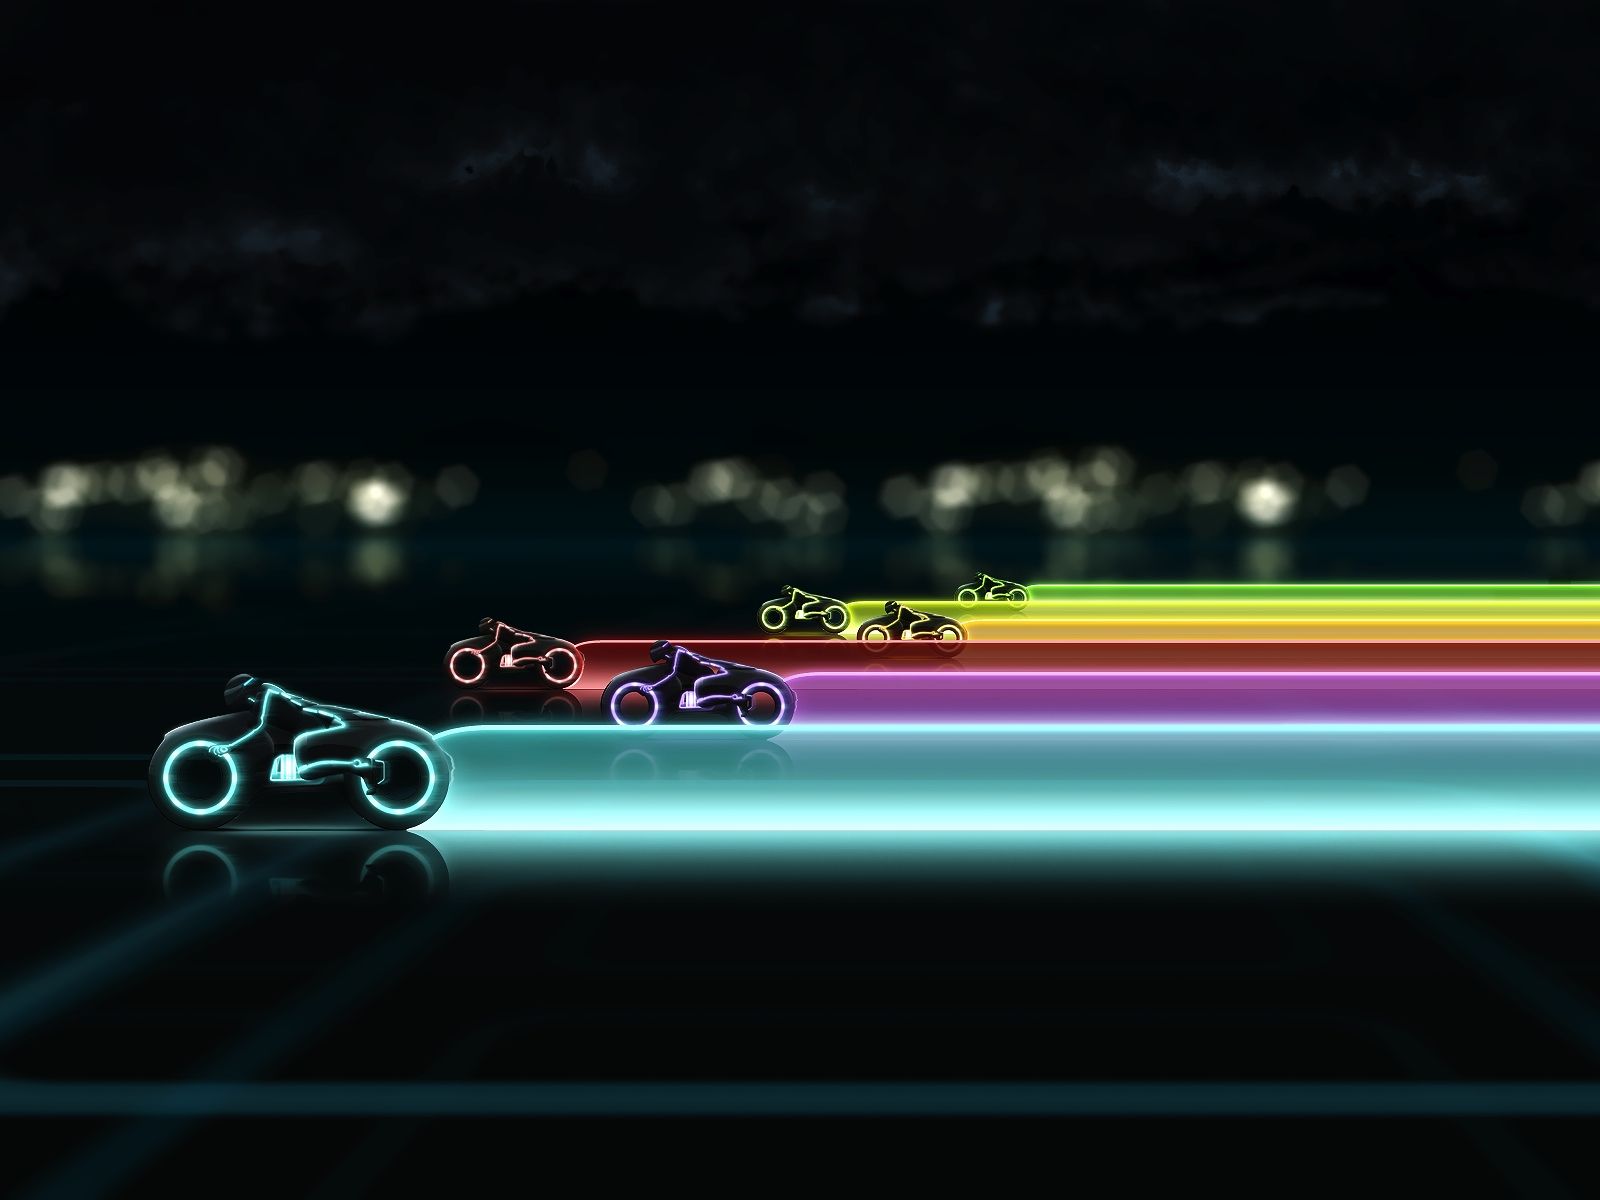 Tron Legacy Wallpapers - - HD Backgrounds